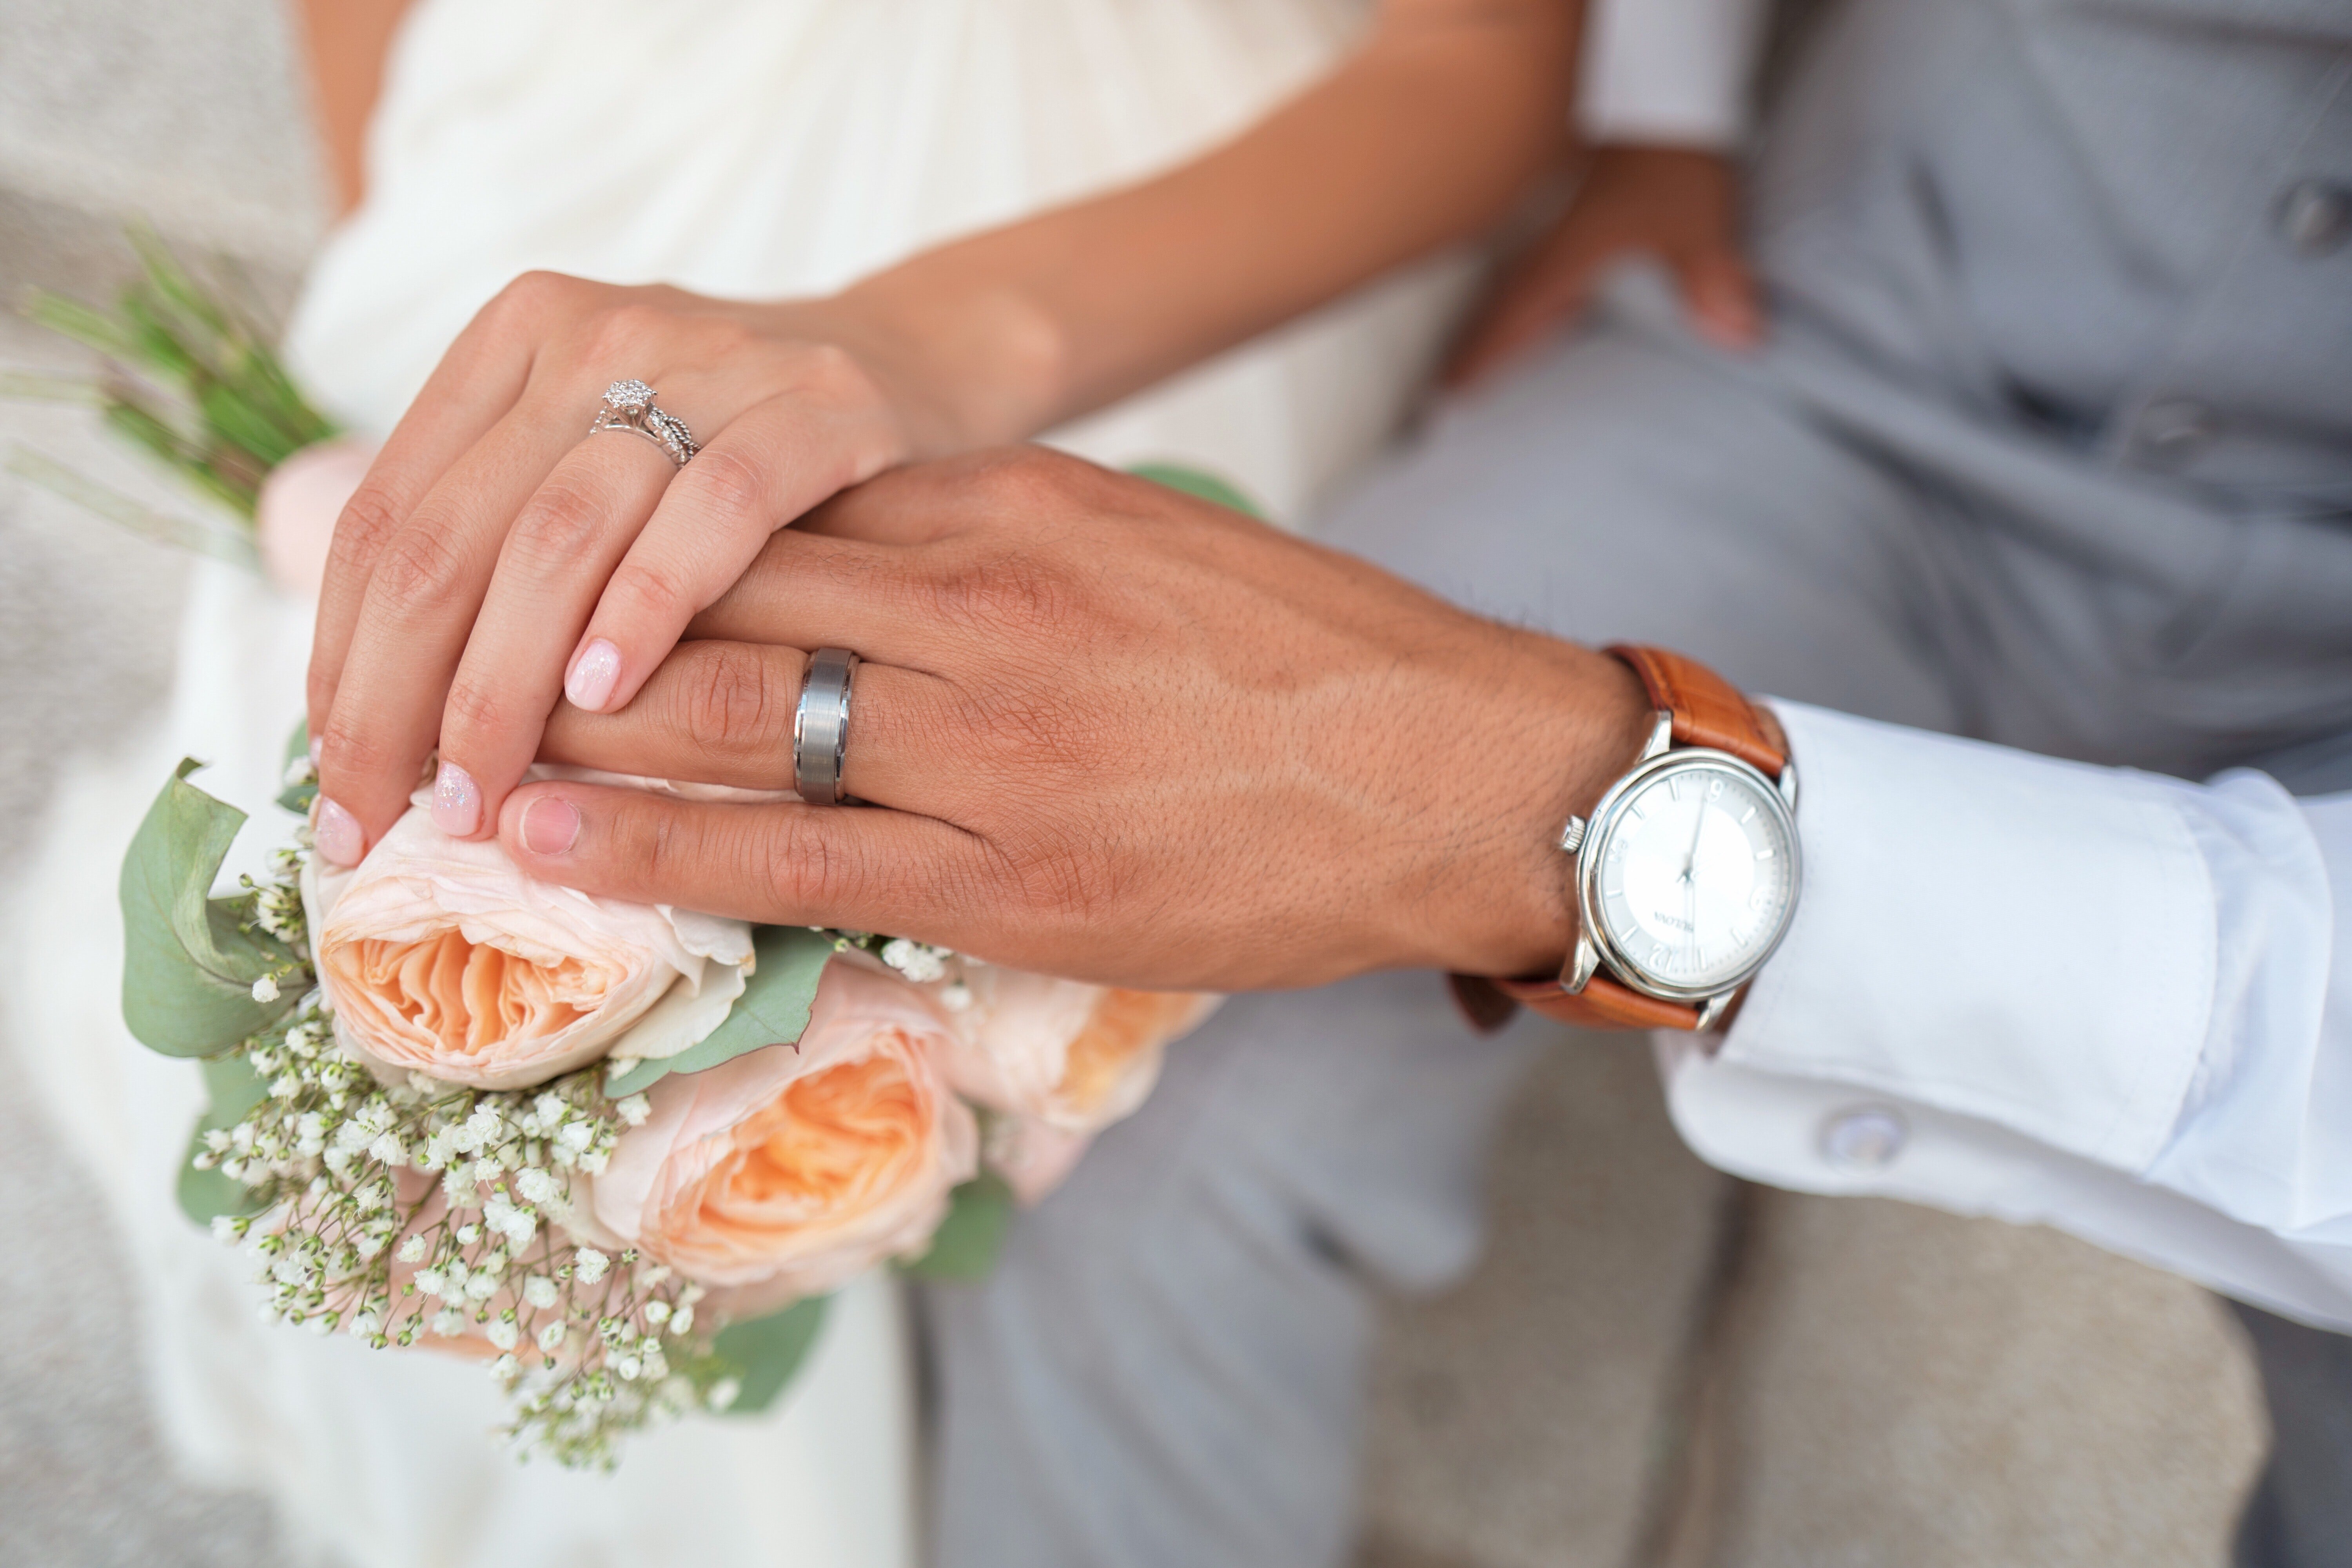 Ally's ignorance of John's wealth persisted even after John asked her hand in marriage, and they got married at a church | Source: Pexels